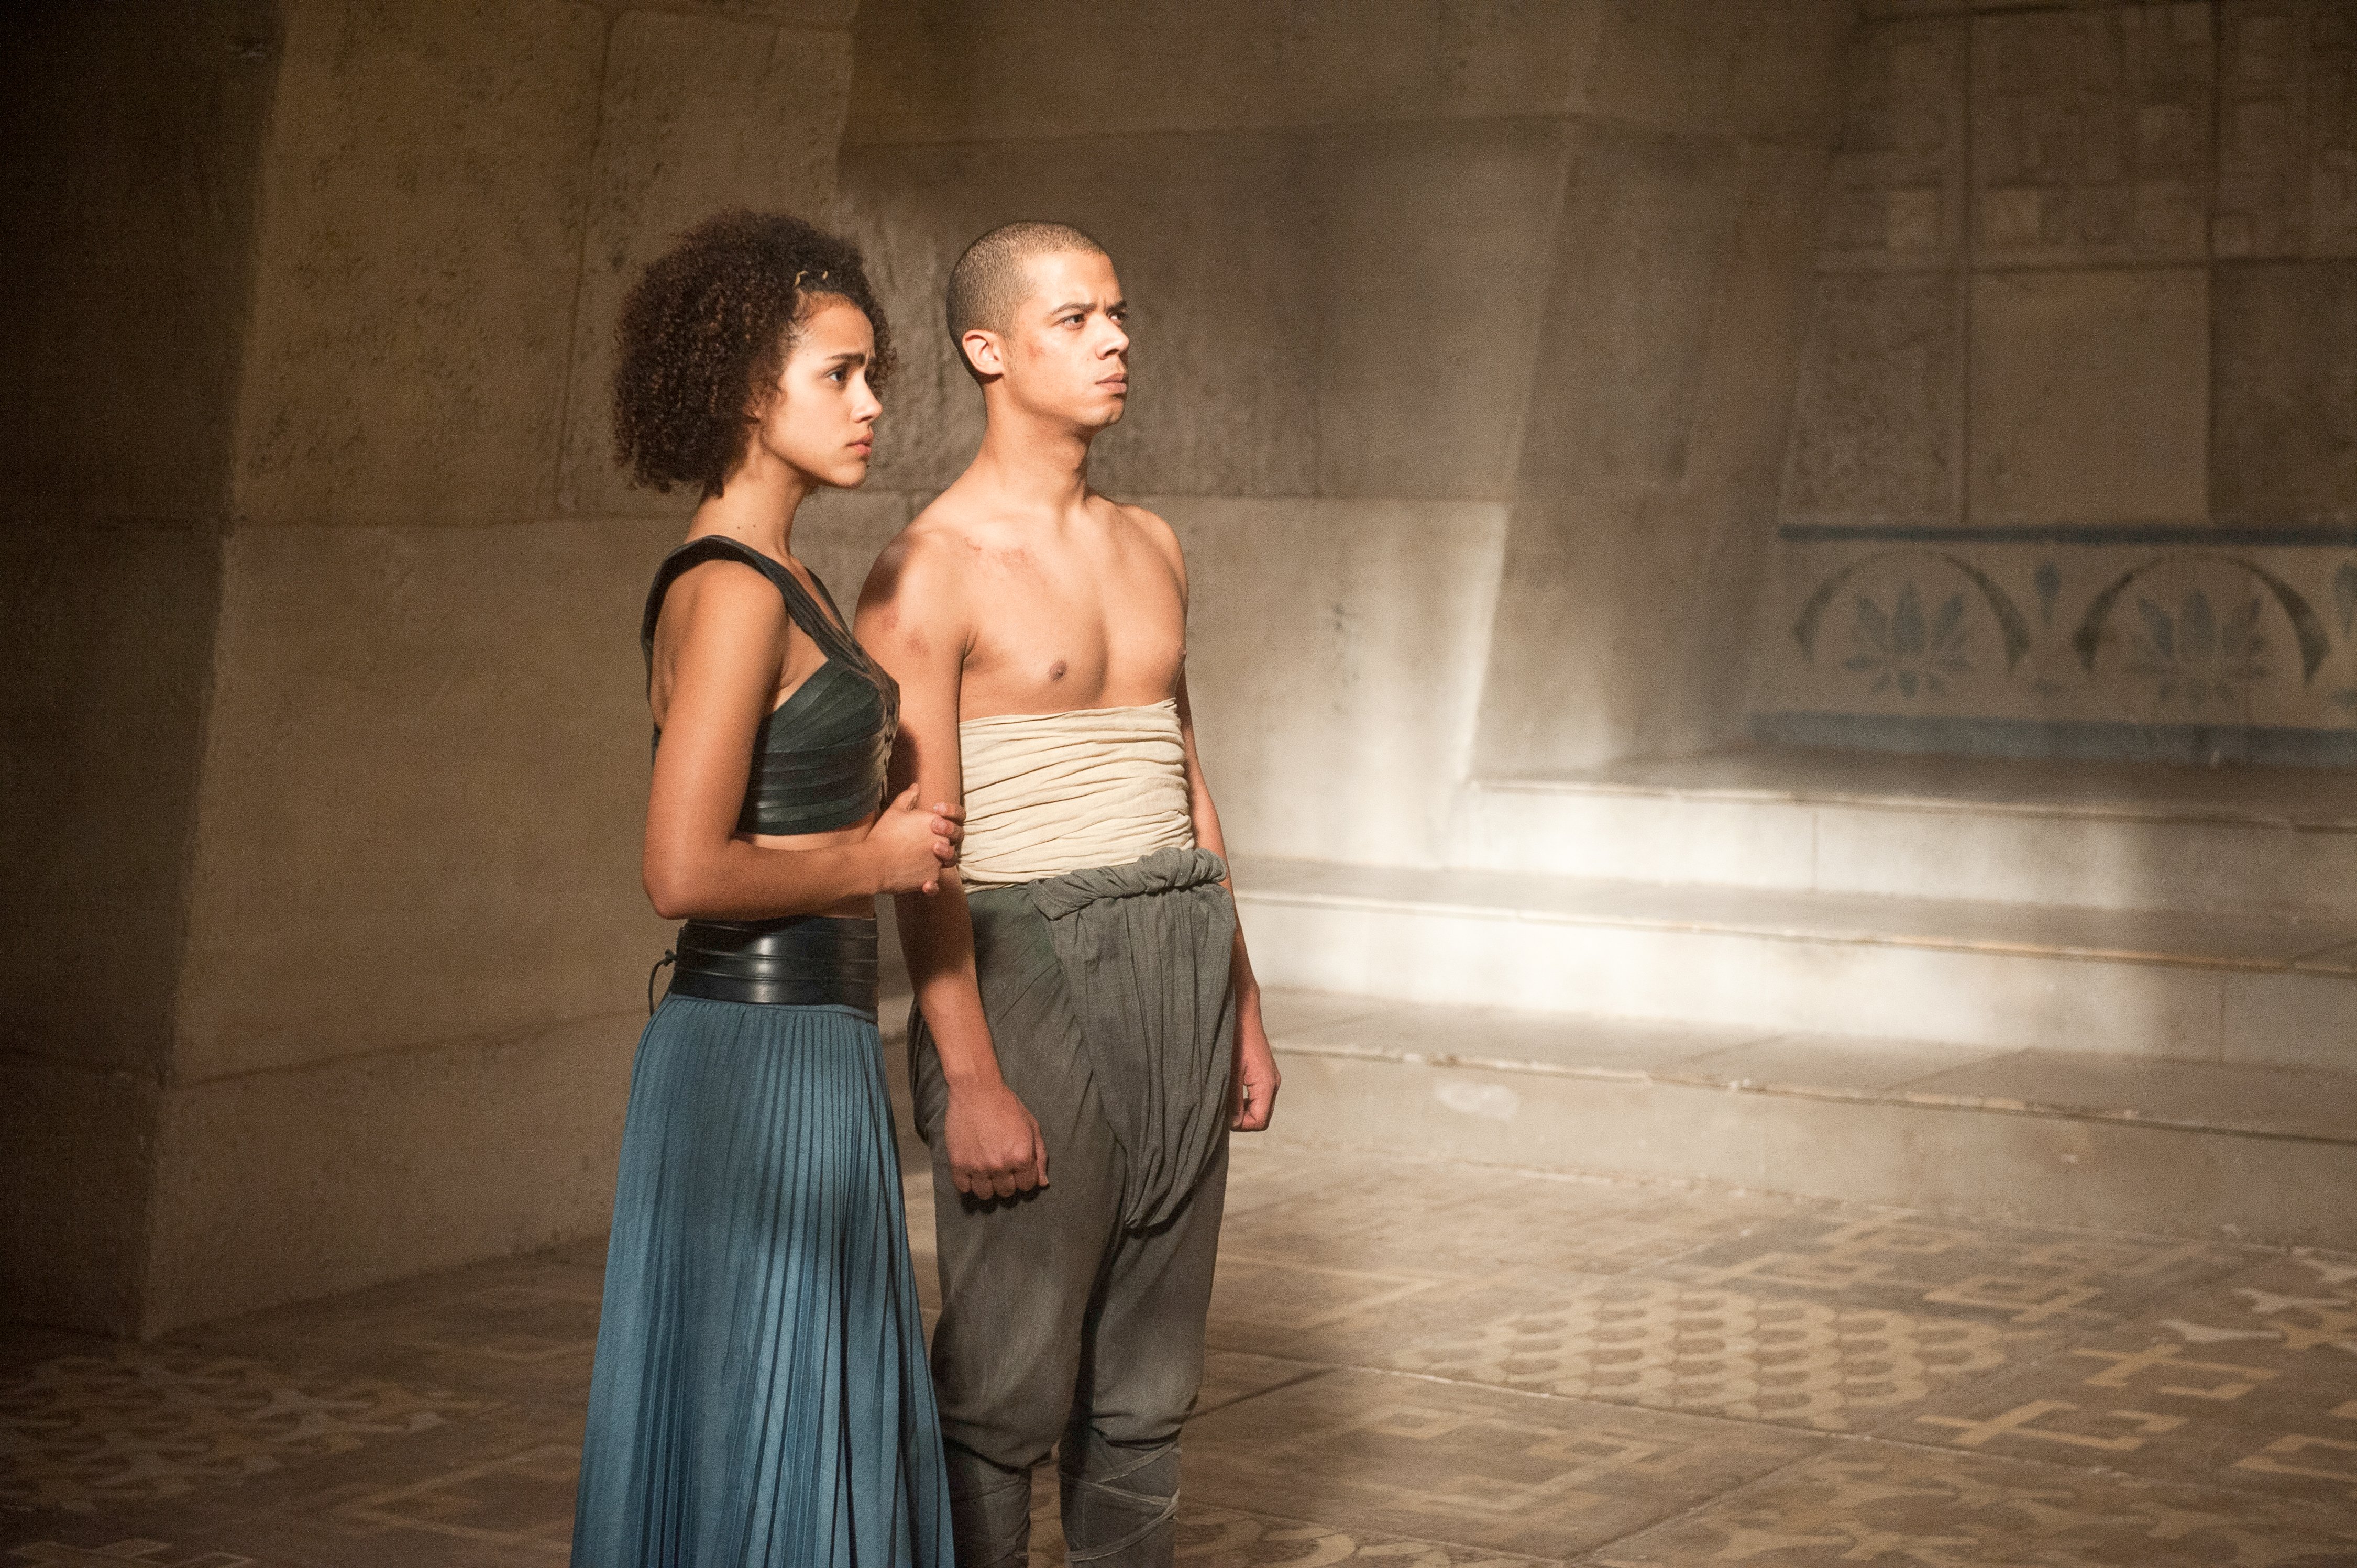 Game Of Thrones Grey Worm Jacob Anderson Missandei Game Of Thrones Nathalie Emmanuel 4500x2994